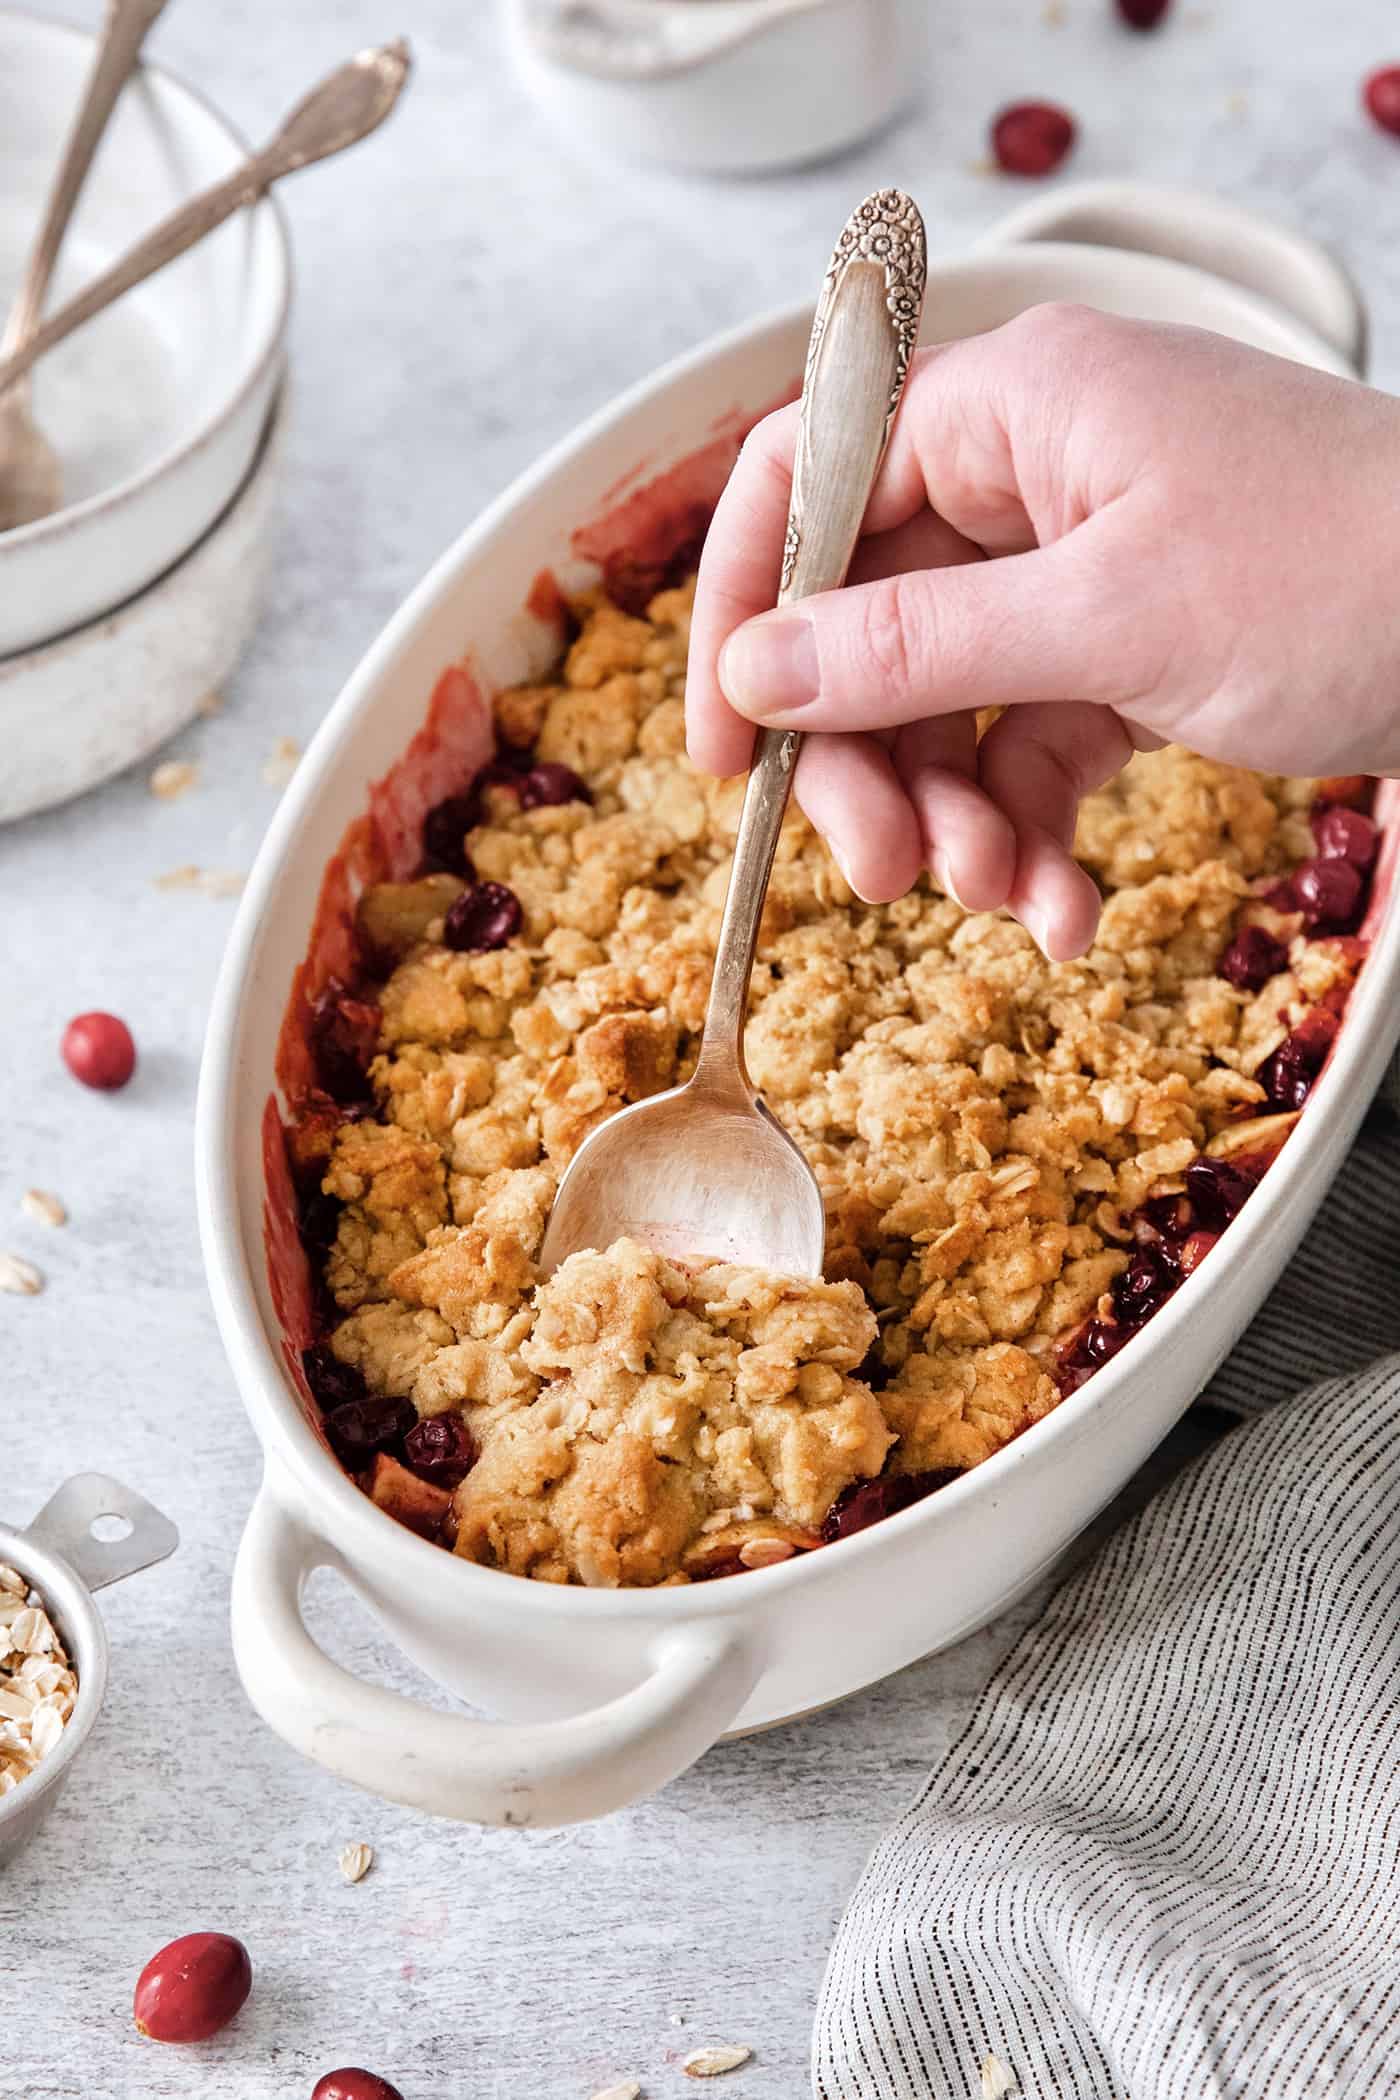 A hand holding a spoon cuts into a dish of cranberry apple crisp.